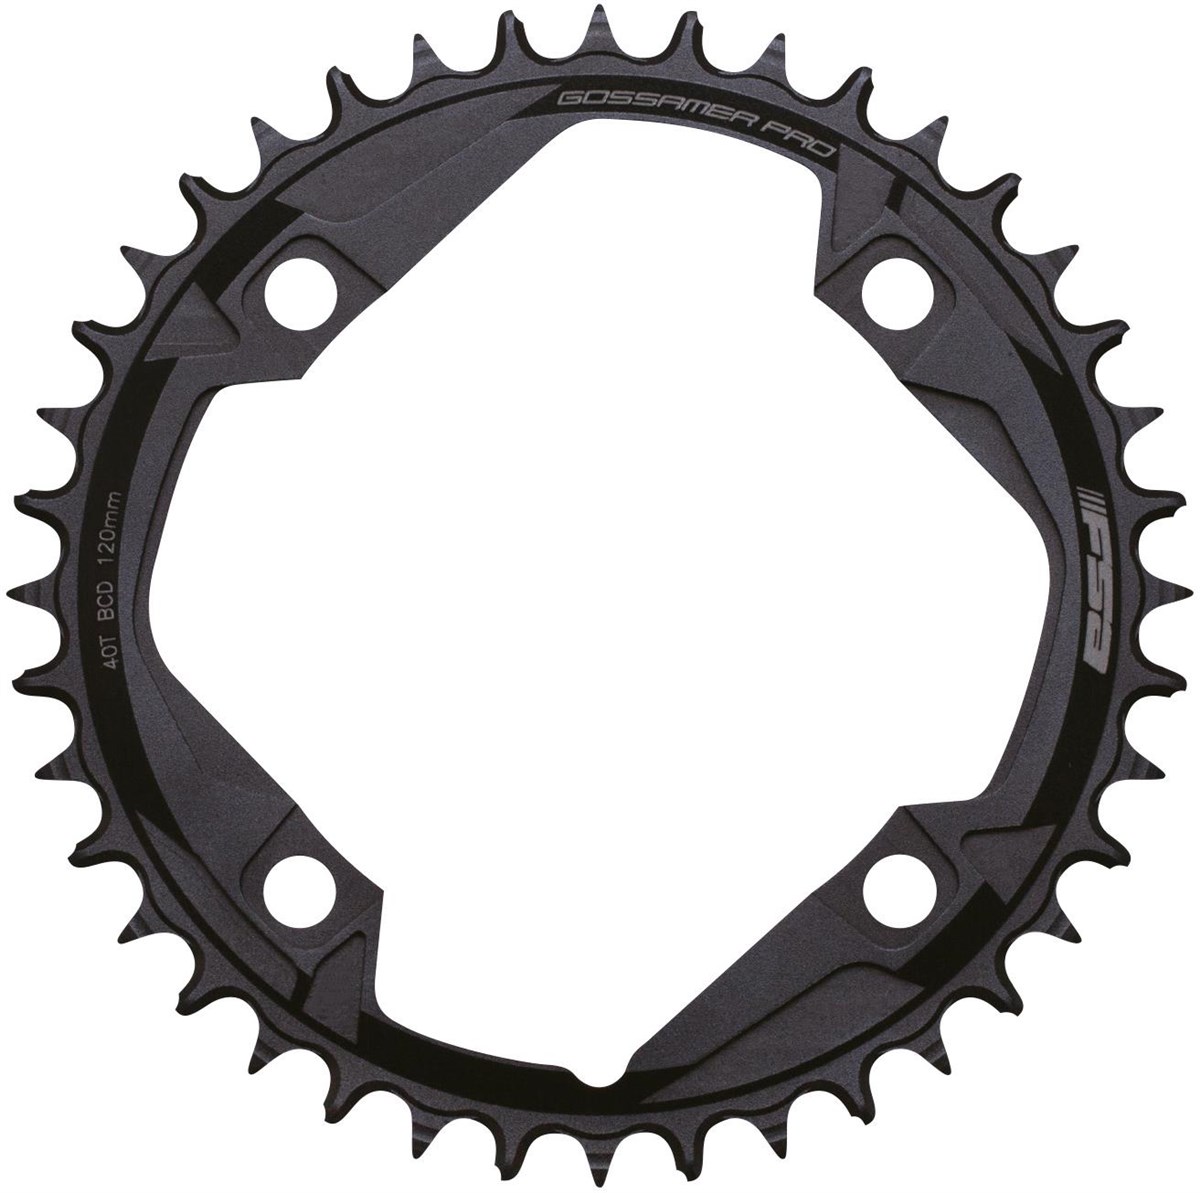 FSA Gossamer Road ABS Chainring product image